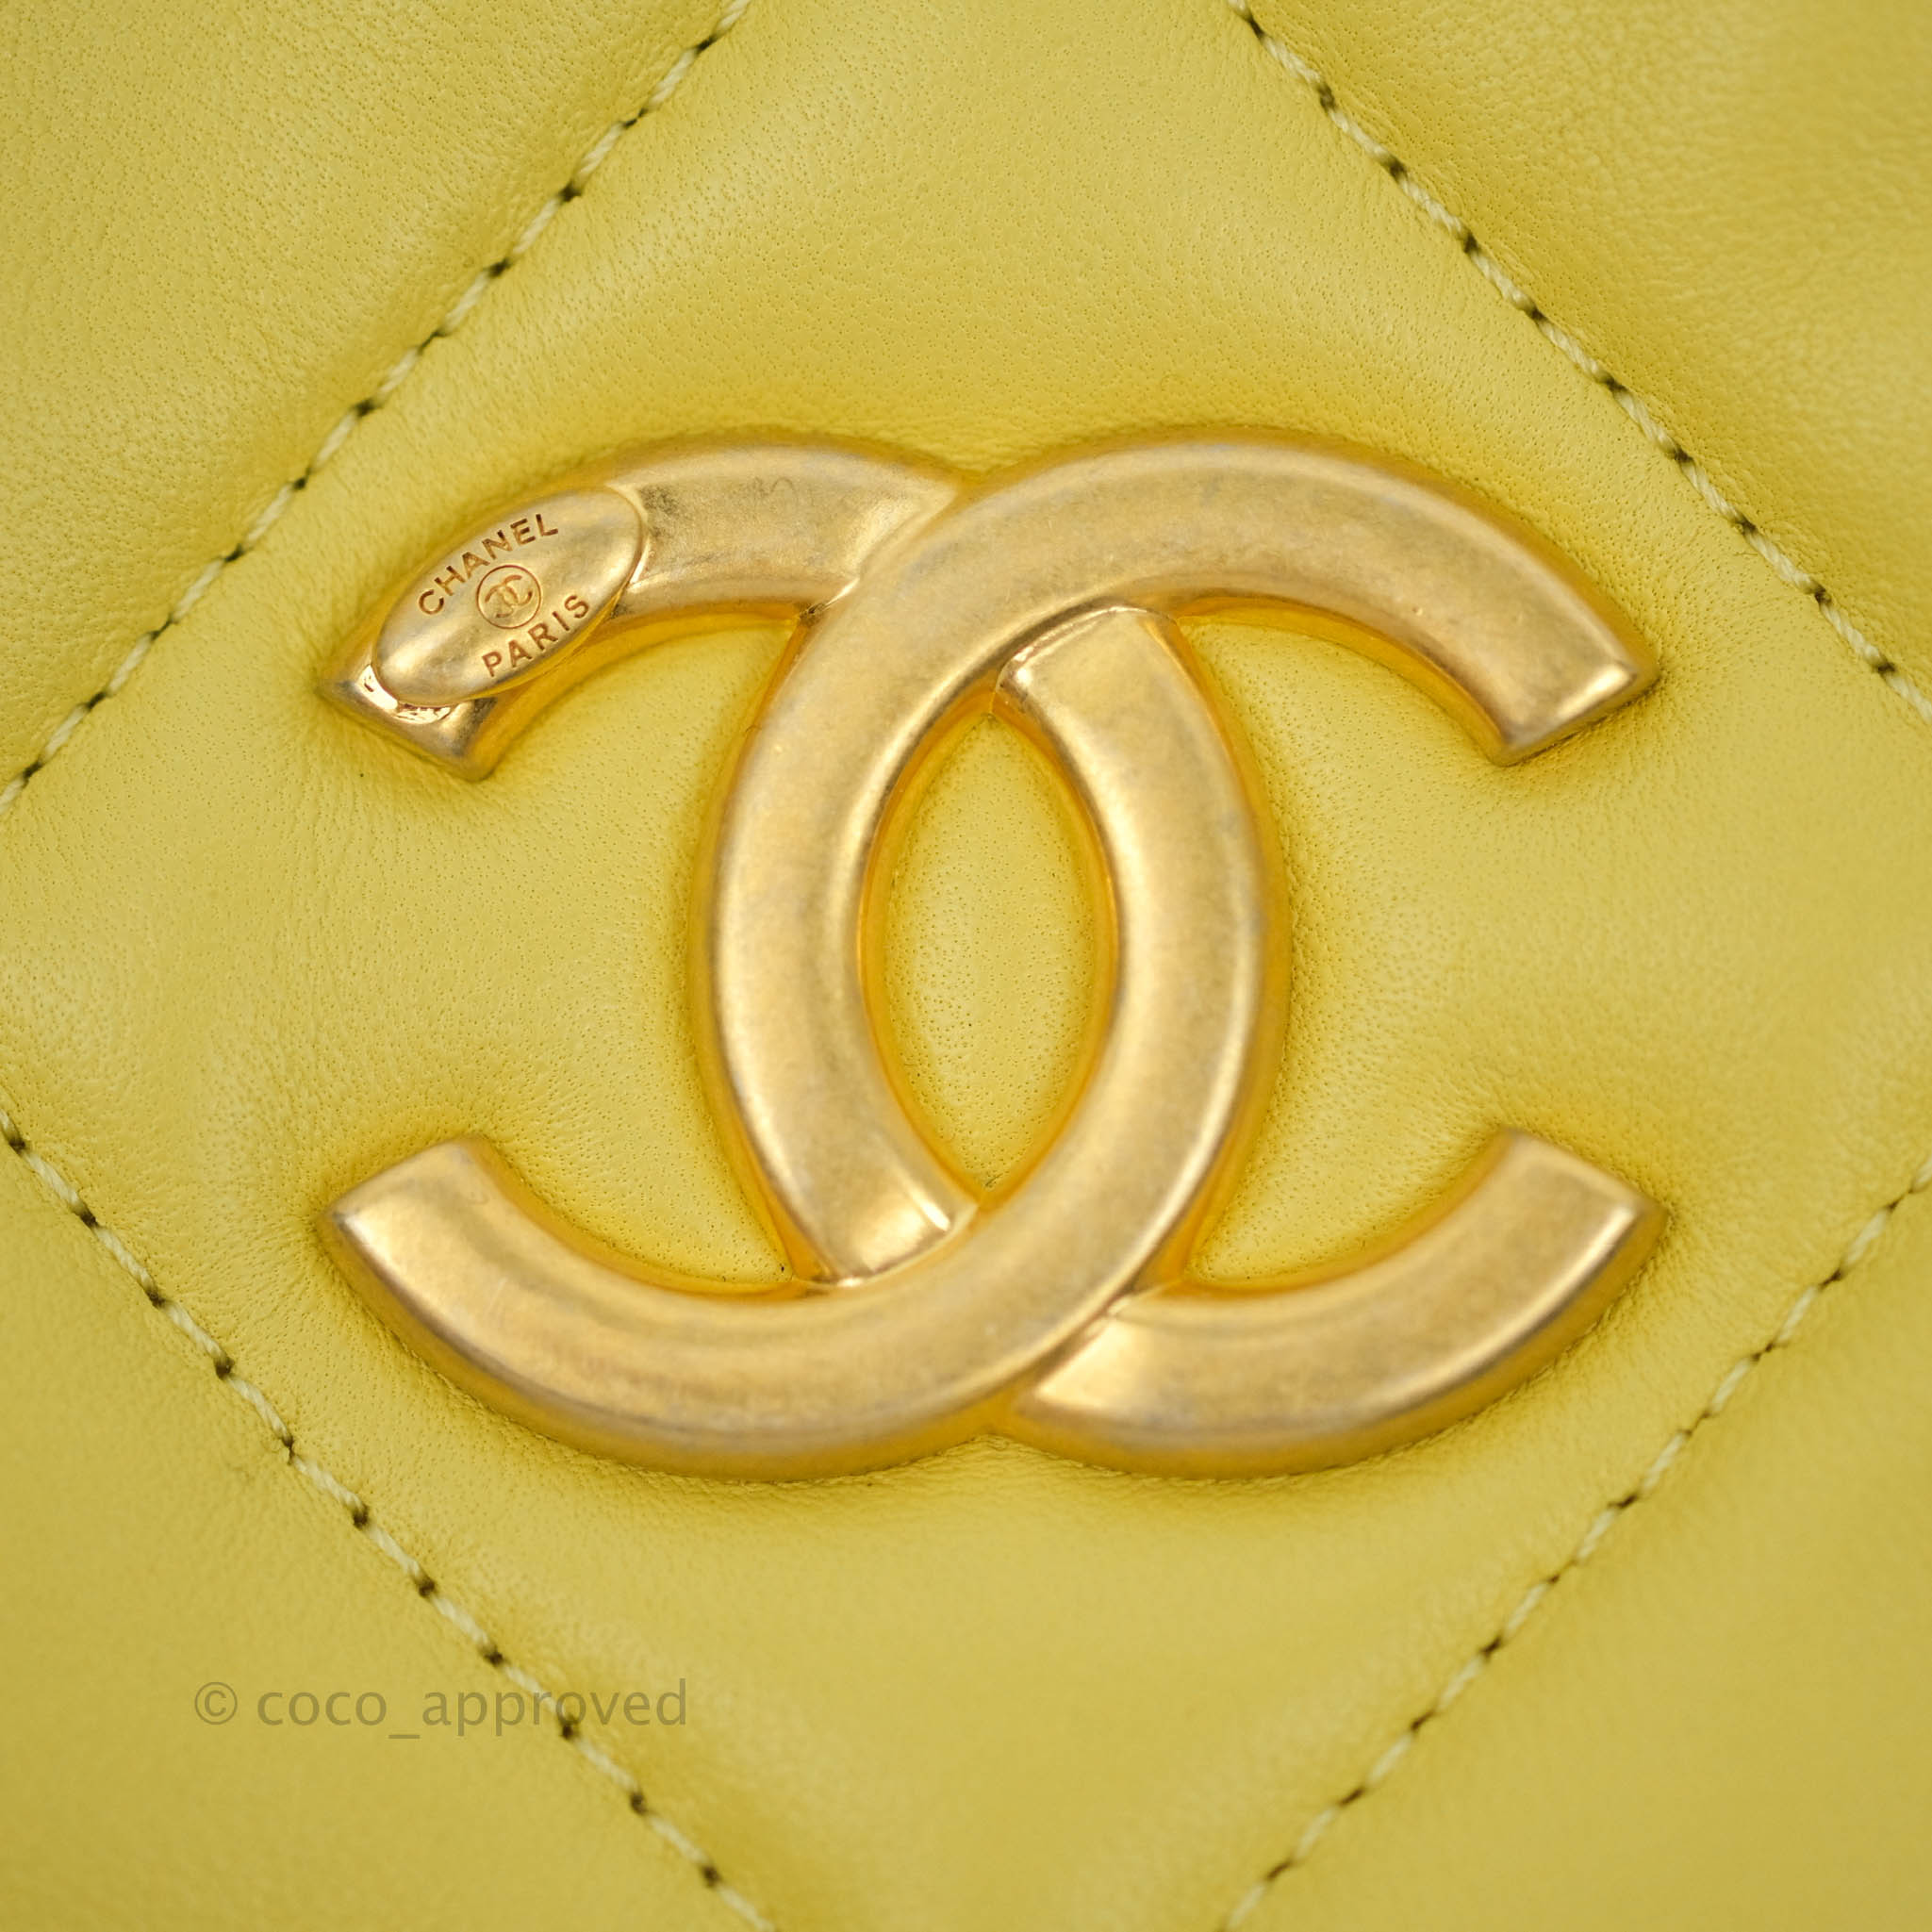 CHANEL Lambskin Quilted Diamond Clutch With Chain Light Green 892323